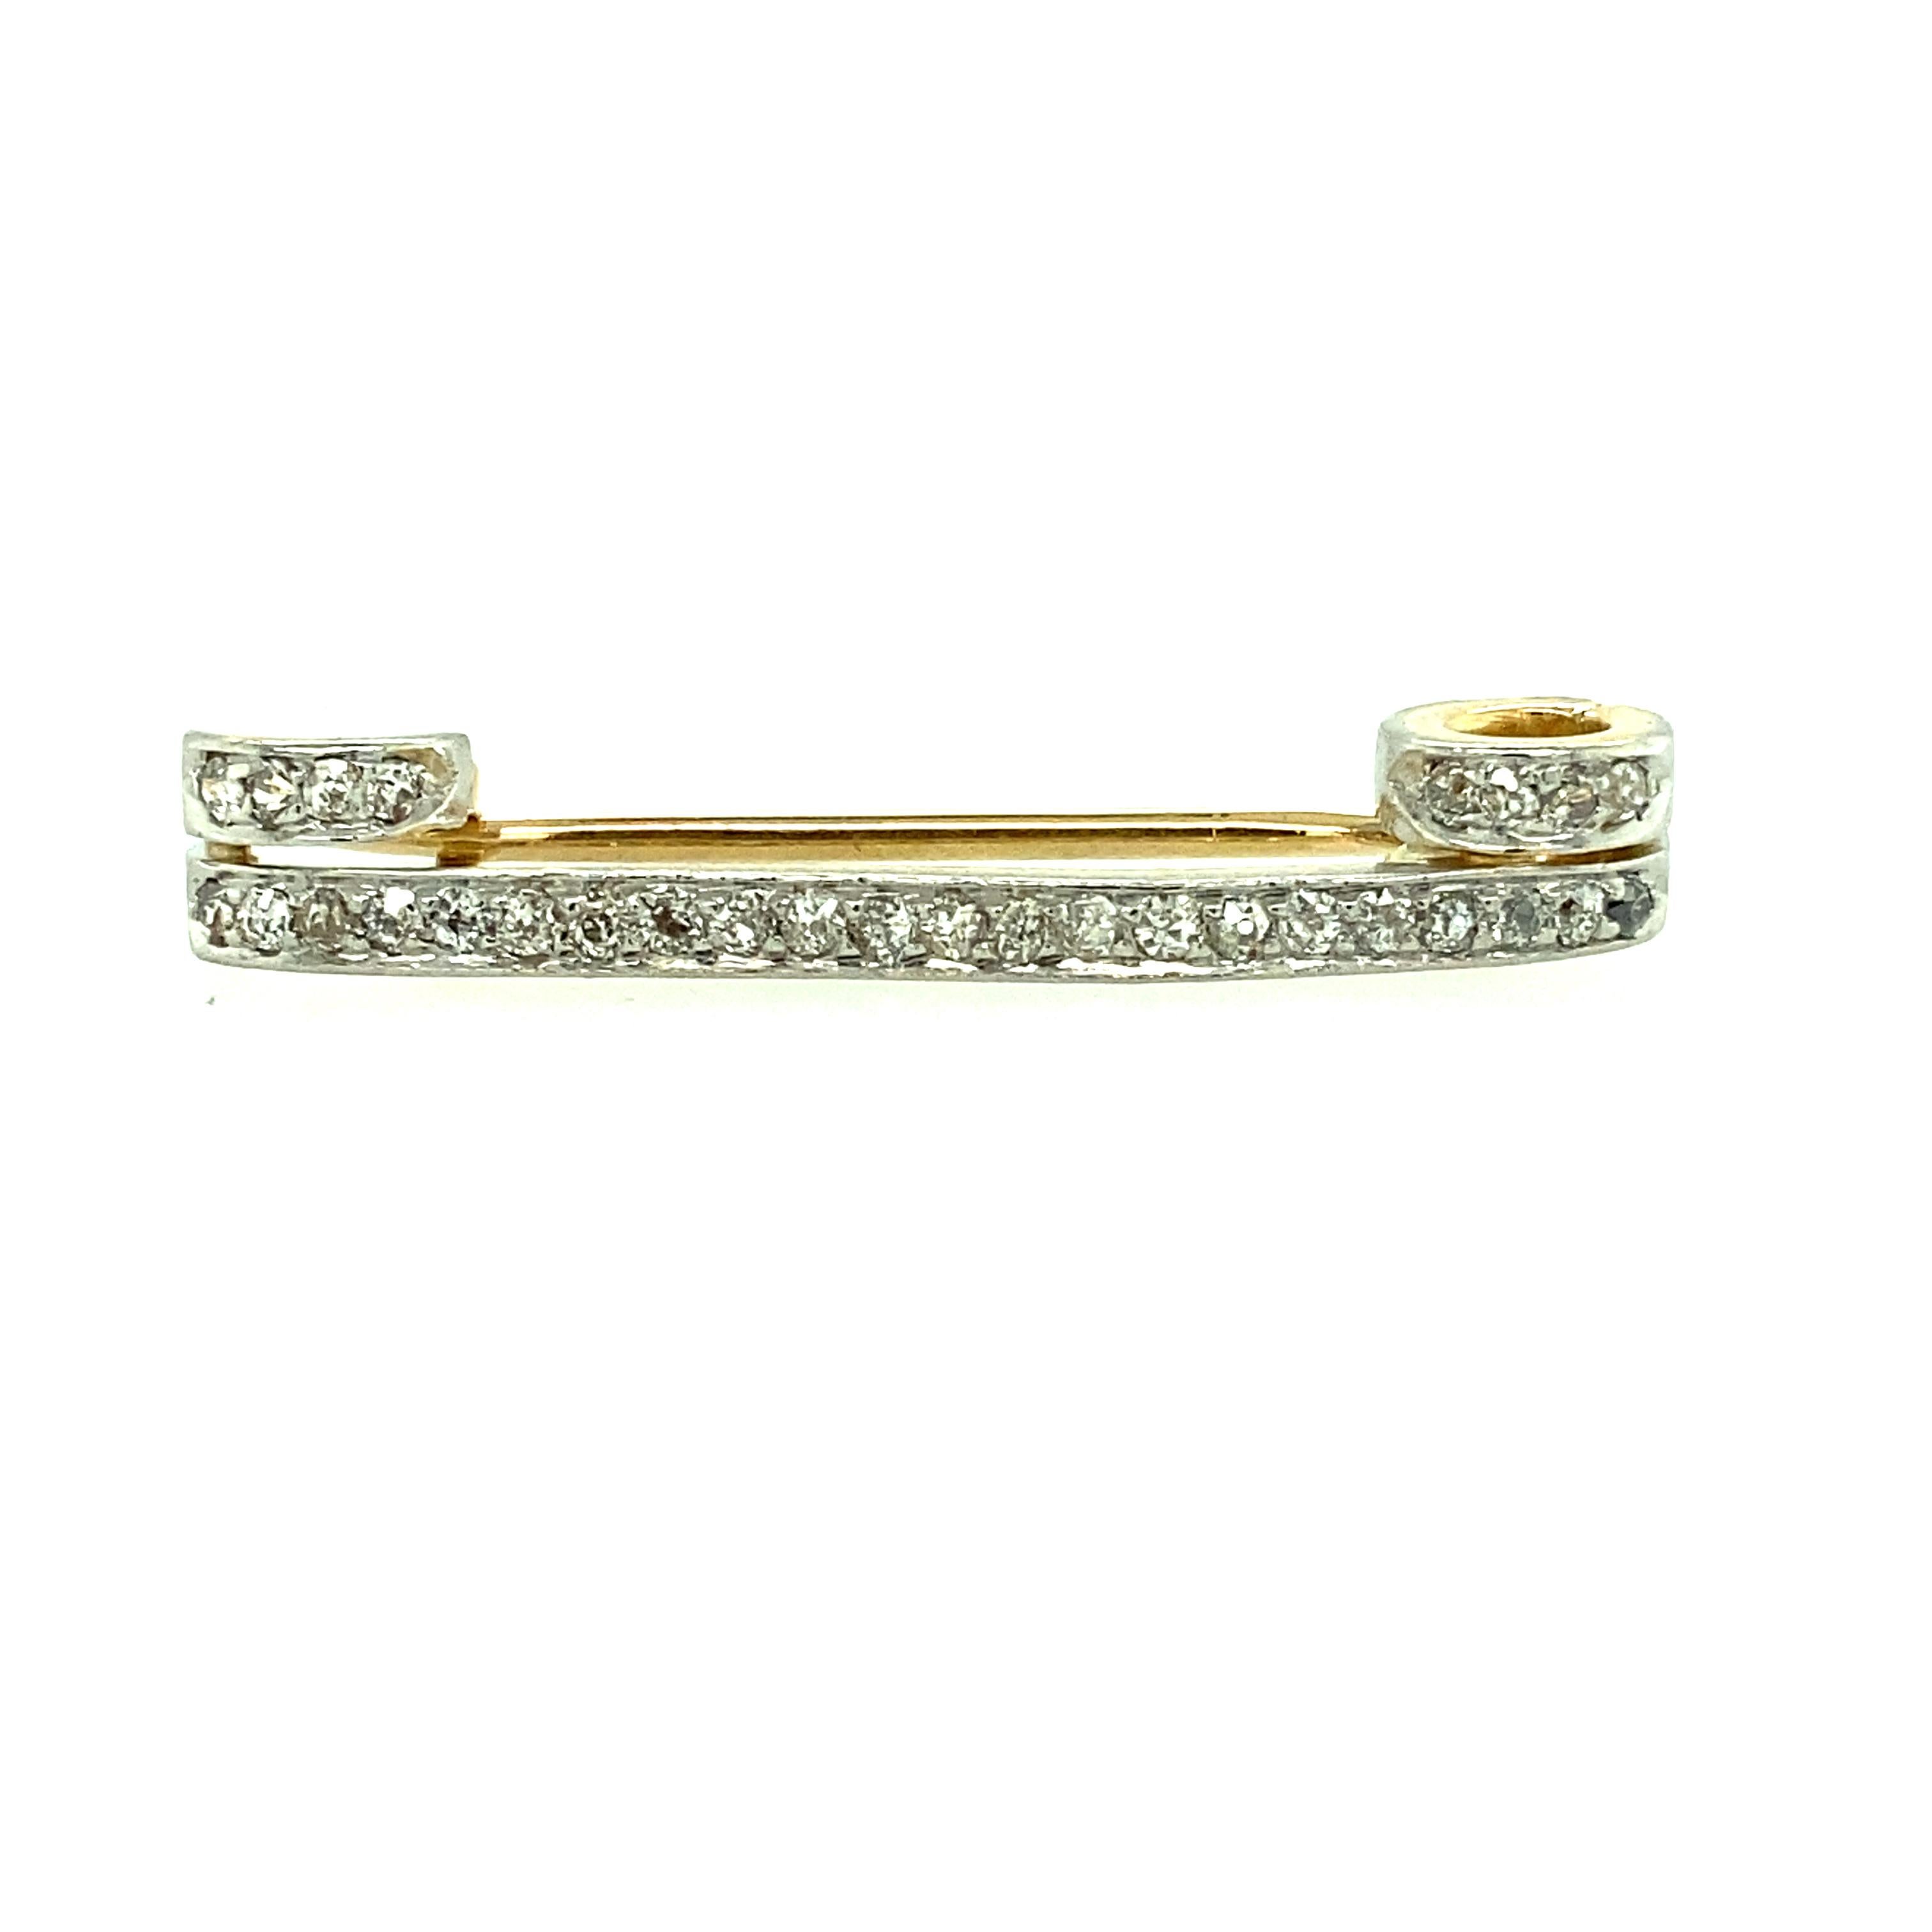 One platinum and 14 karat yellow gold estate pin set with thirty Old Mine cut diamonds, with J/K color and SI clarity. The pin measures 1.5 inches wide and is complete with a traditional pin closure.  